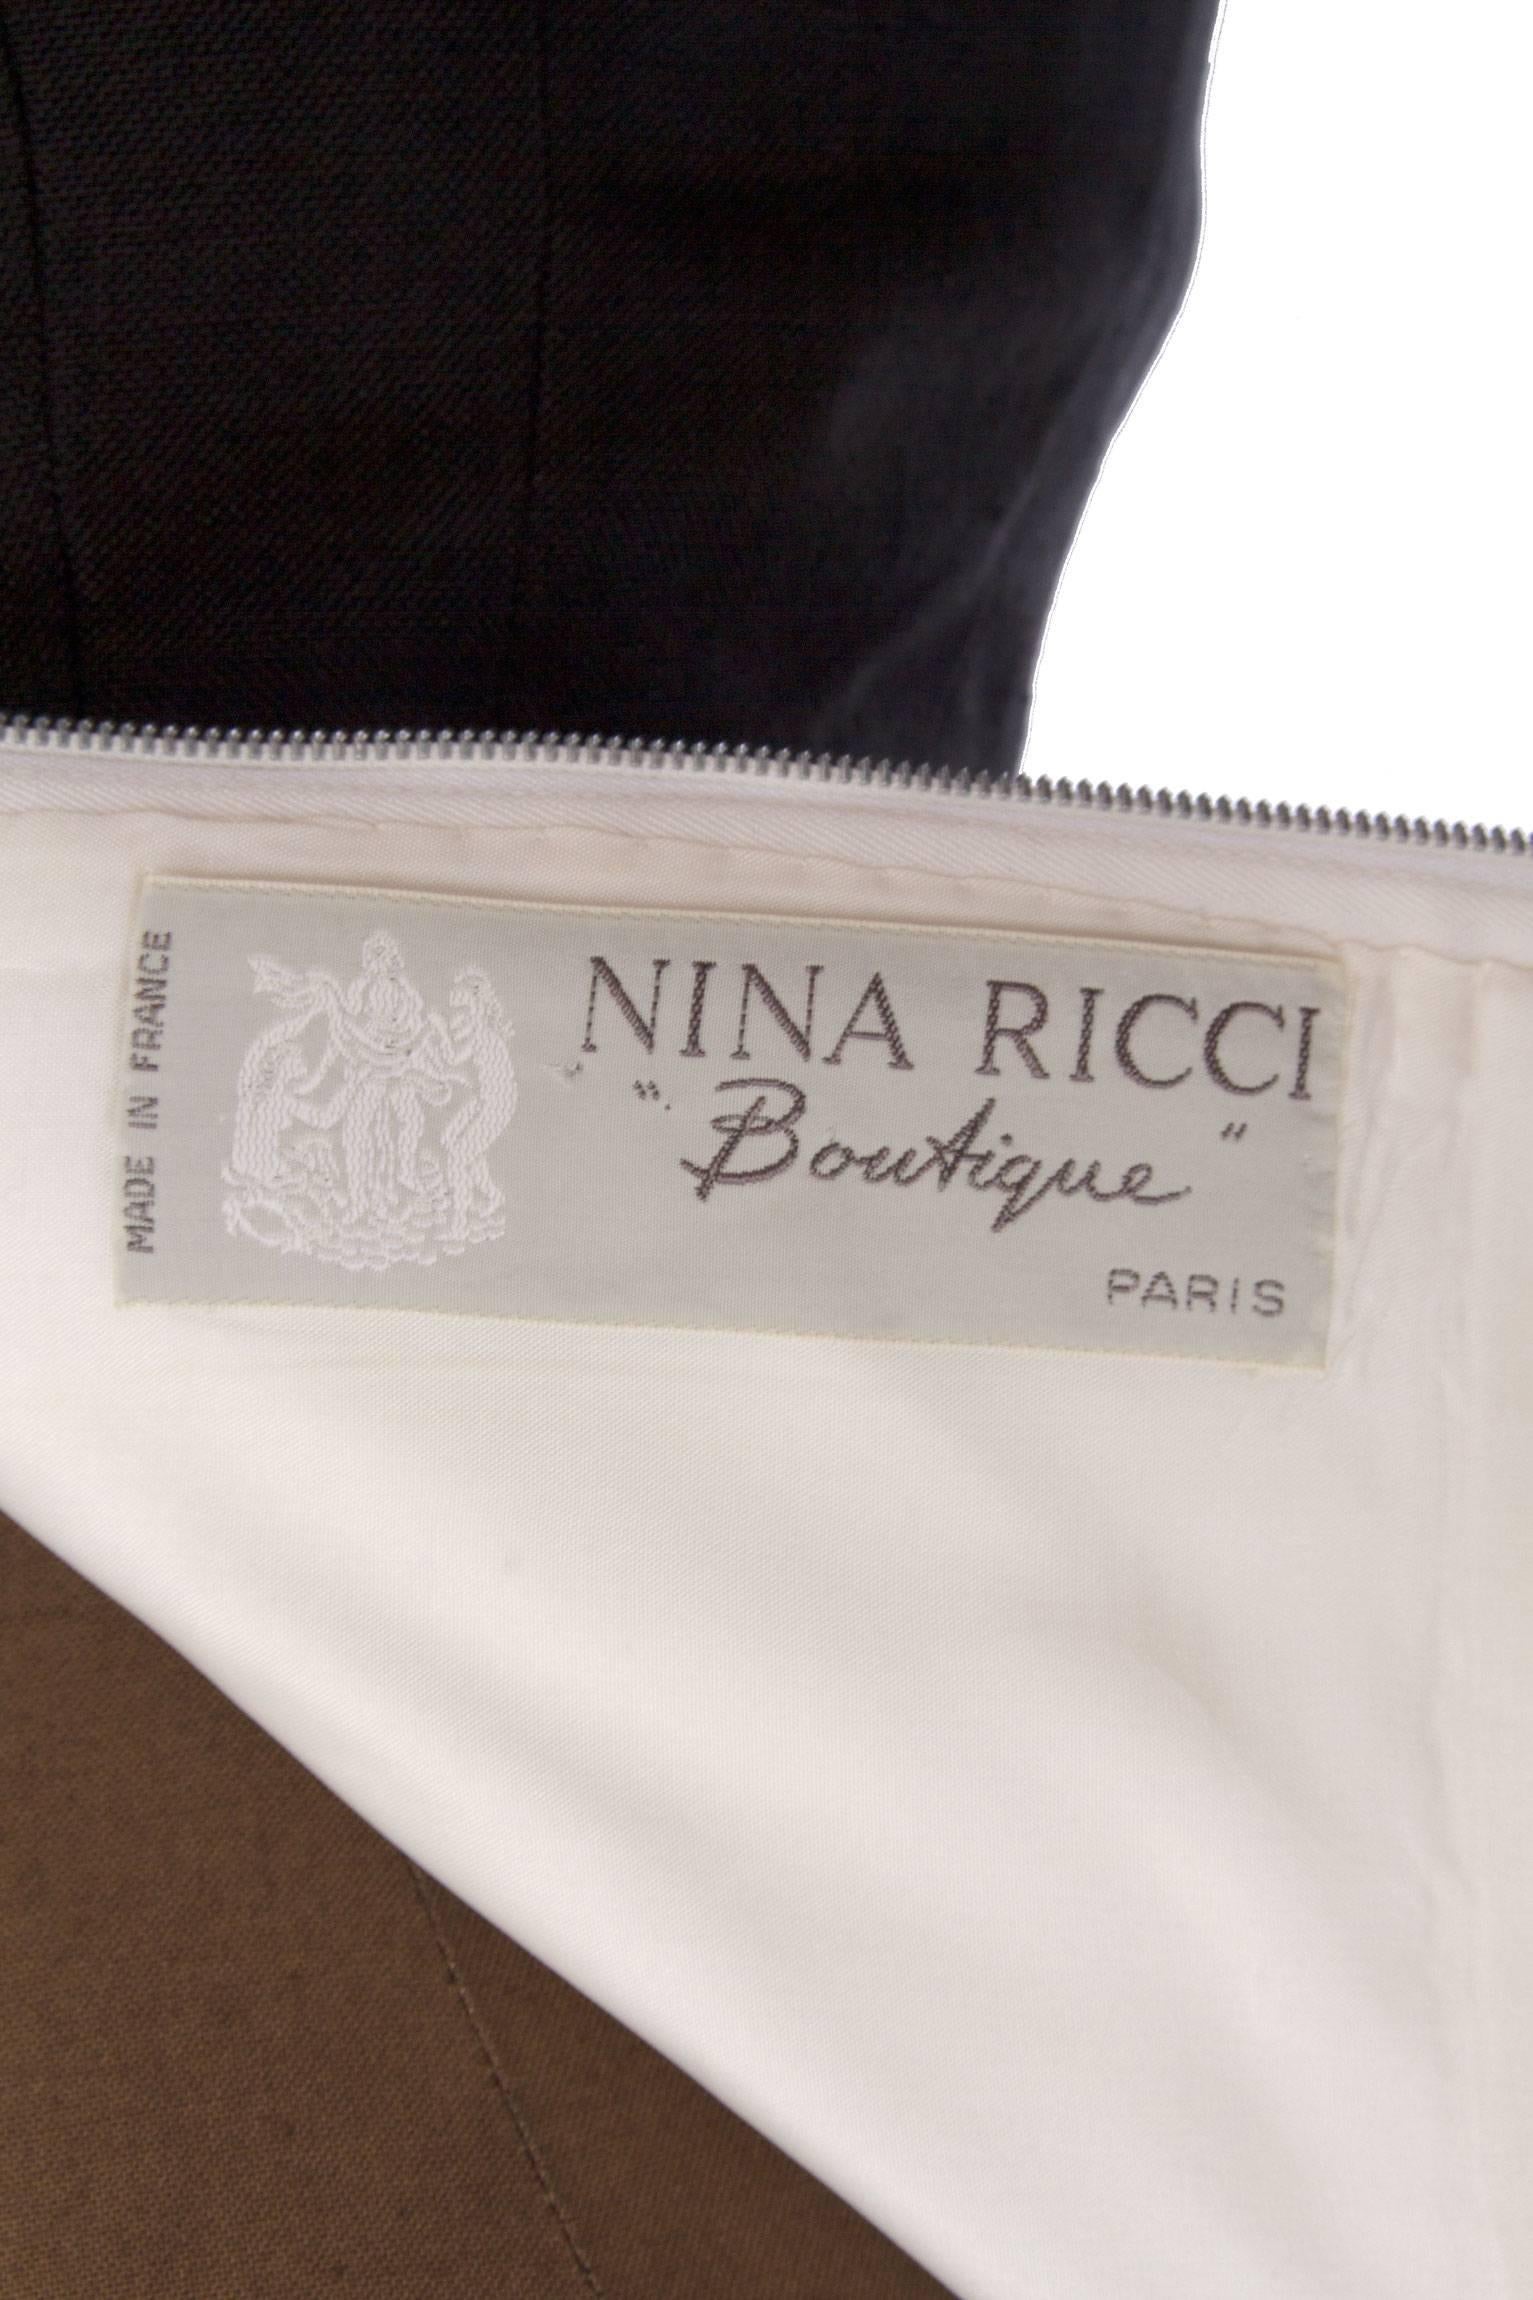 A classic 1980s Nina Ricci linen cocktail dress with a black fitted pencil skirt and an off-white strapless bustier top. The simple yet elegant dress has a beautiful abstract cutout at the top of the dress, which gently frames and covers the